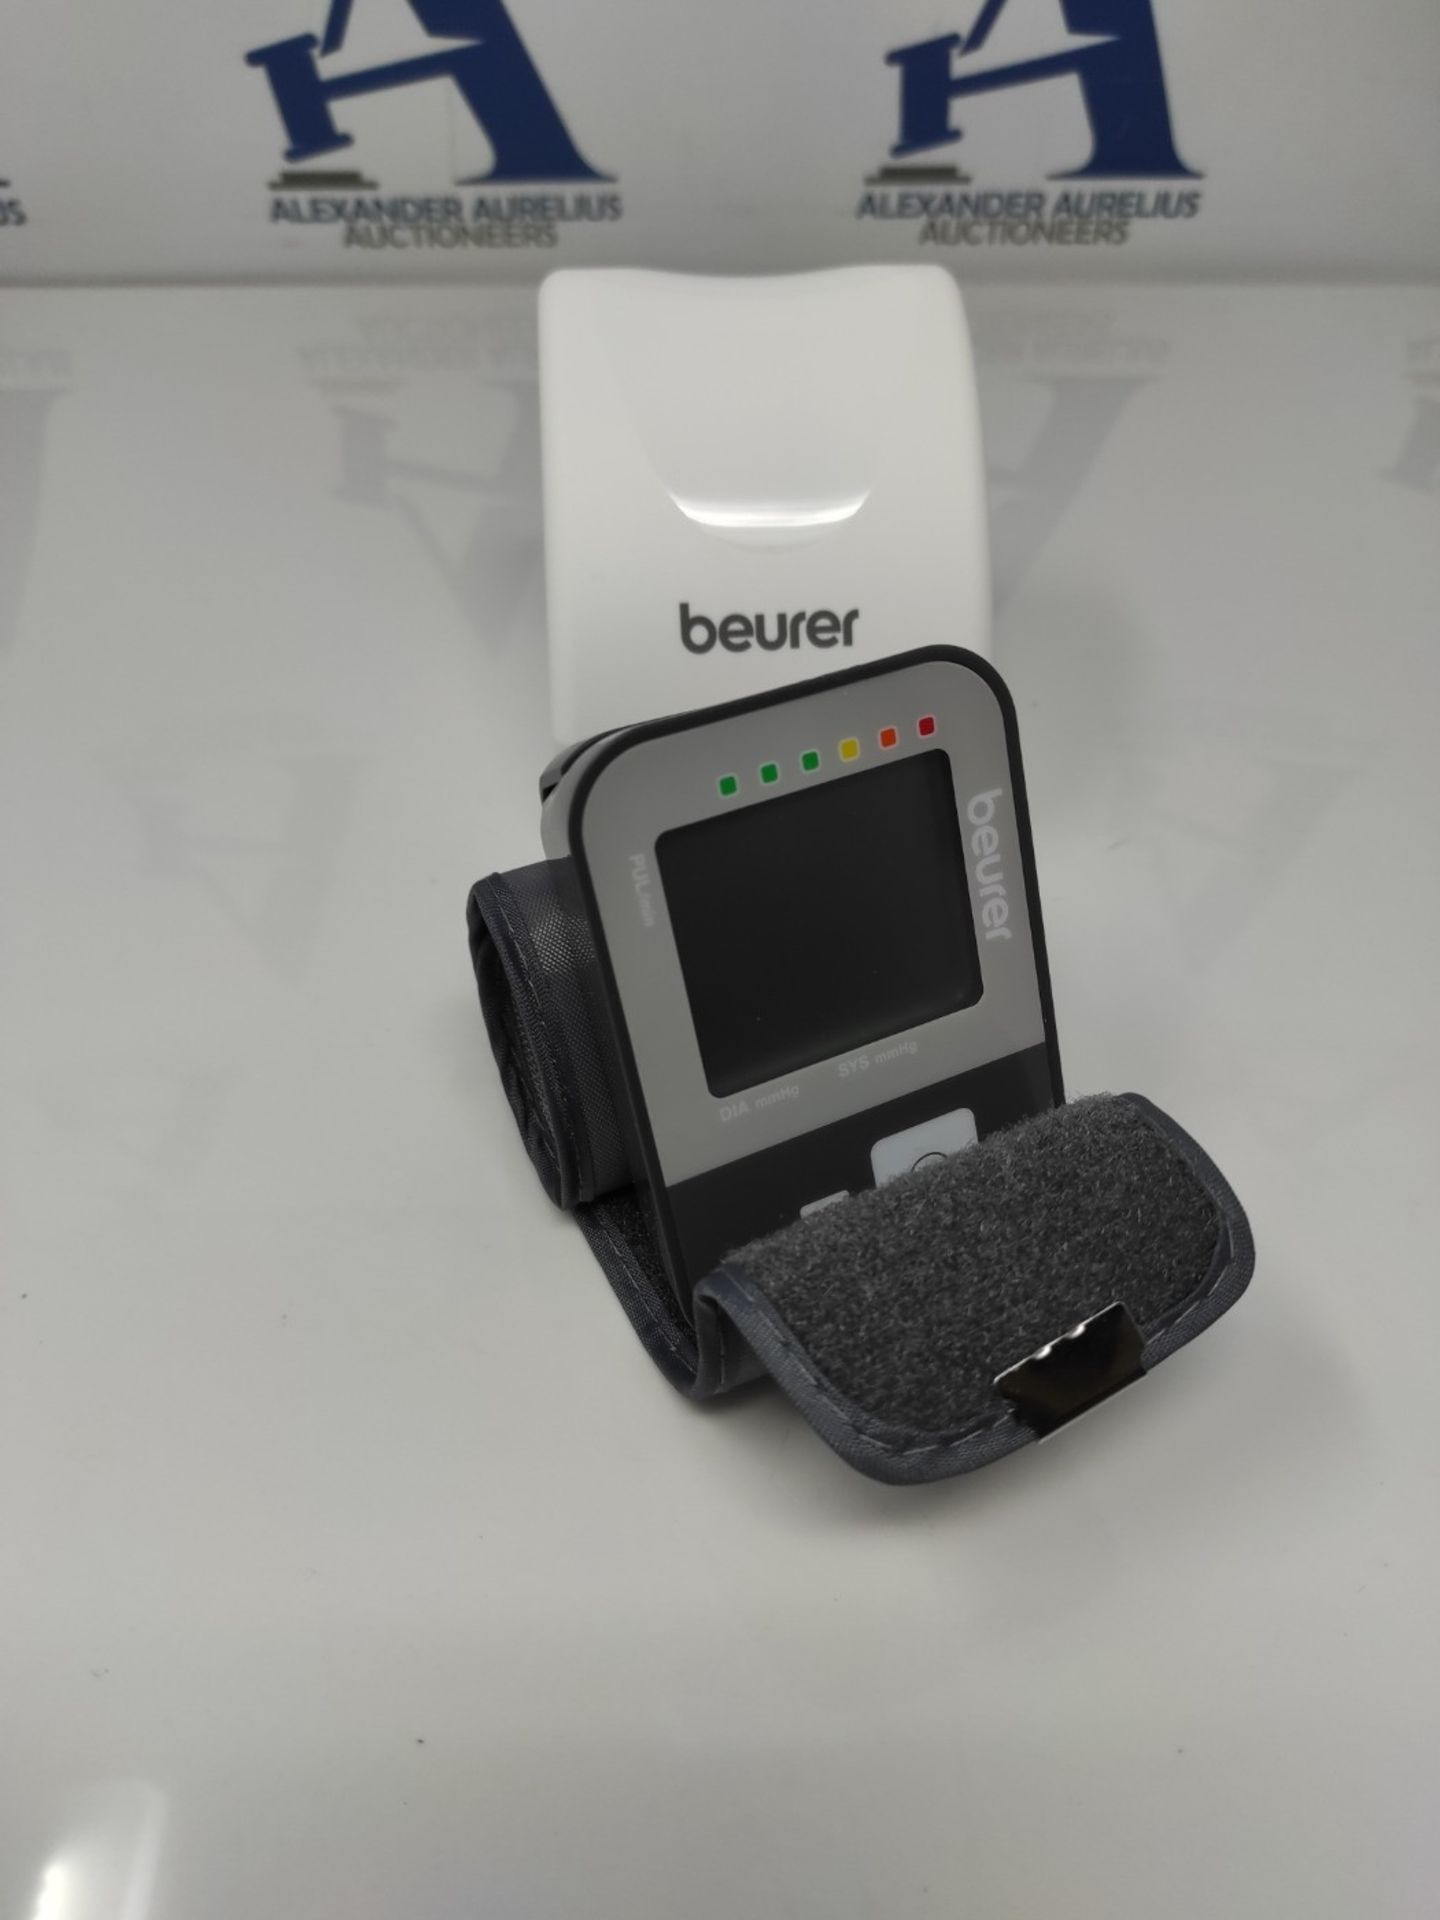 Beurer BC 27 Wrist Blood Pressure Monitor with Arrhythmia Detection, Fully Automatic M - Image 3 of 3